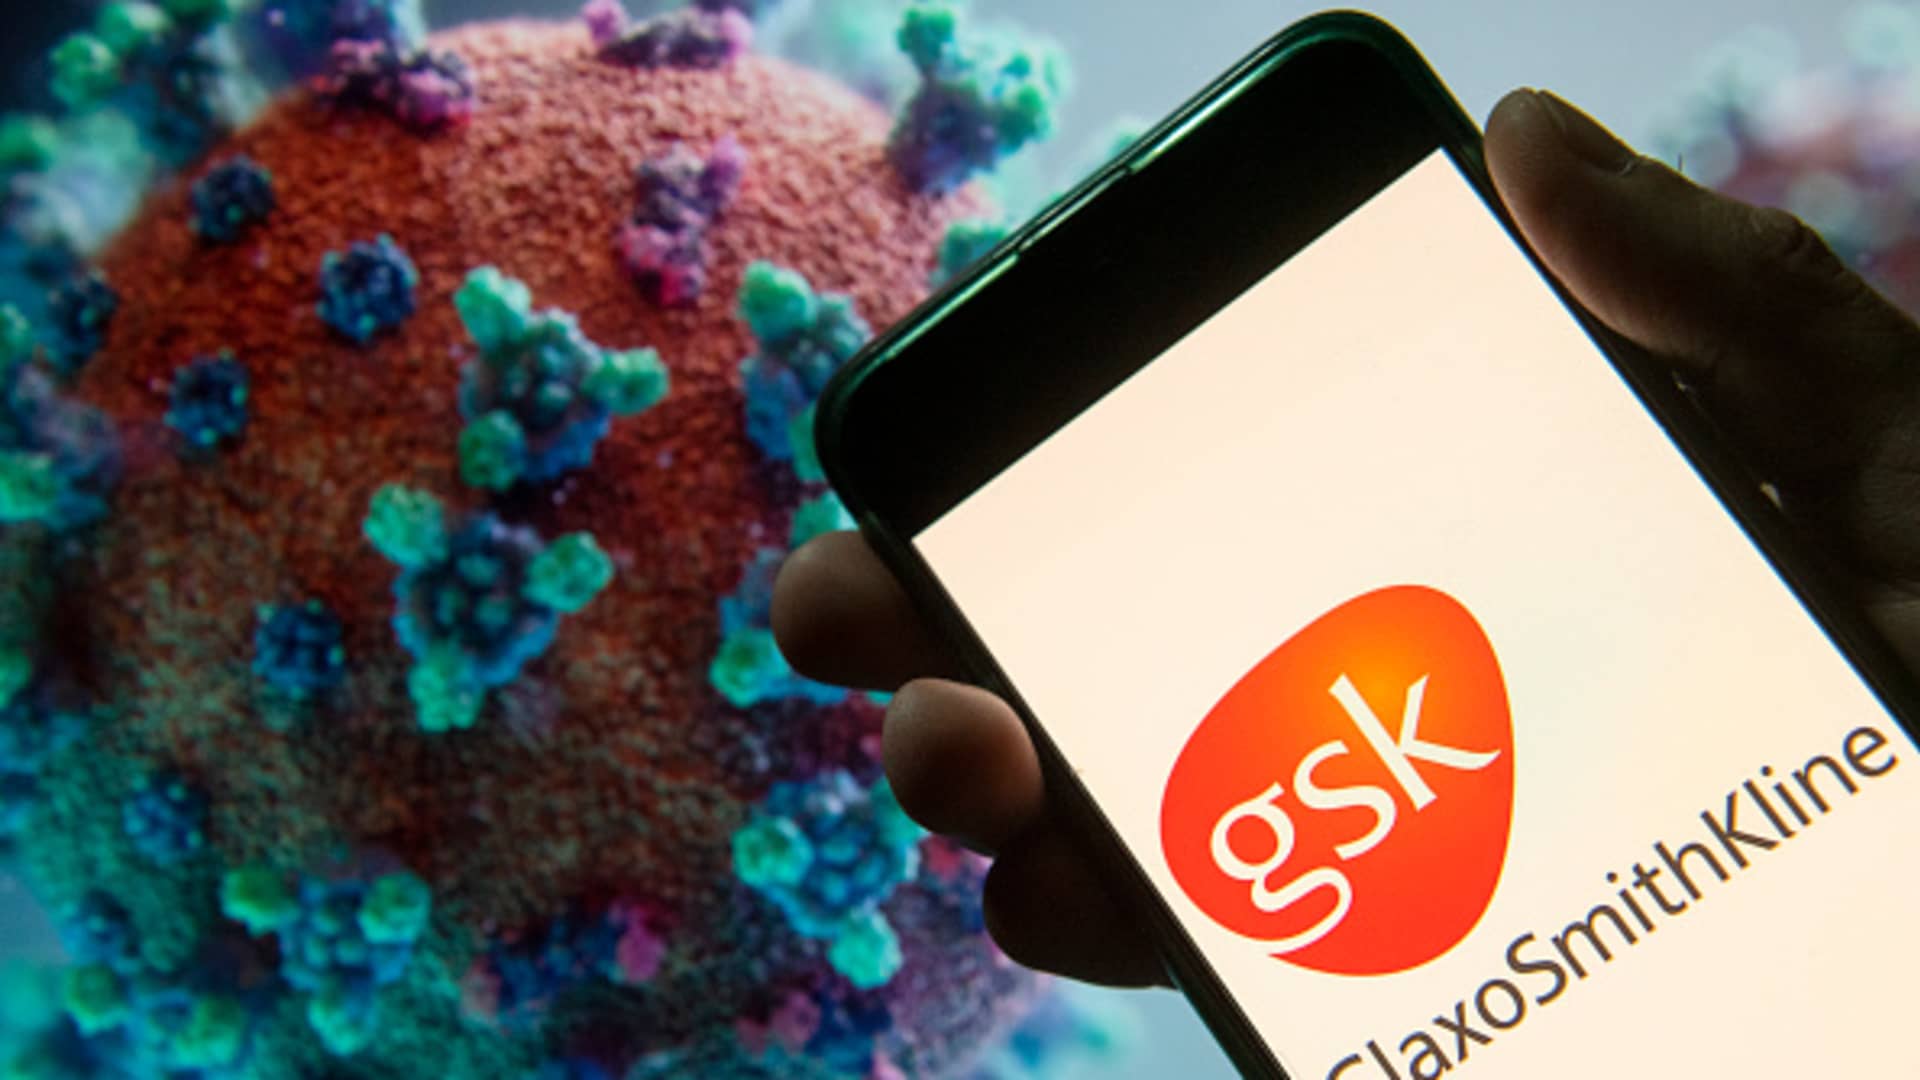 In this photo illustration the British multinational pharmaceutical company GlaxoSmithKline (GSK) logo seen displayed on a smartphone with a computer model of the COVID-19 coronavirus on the background.